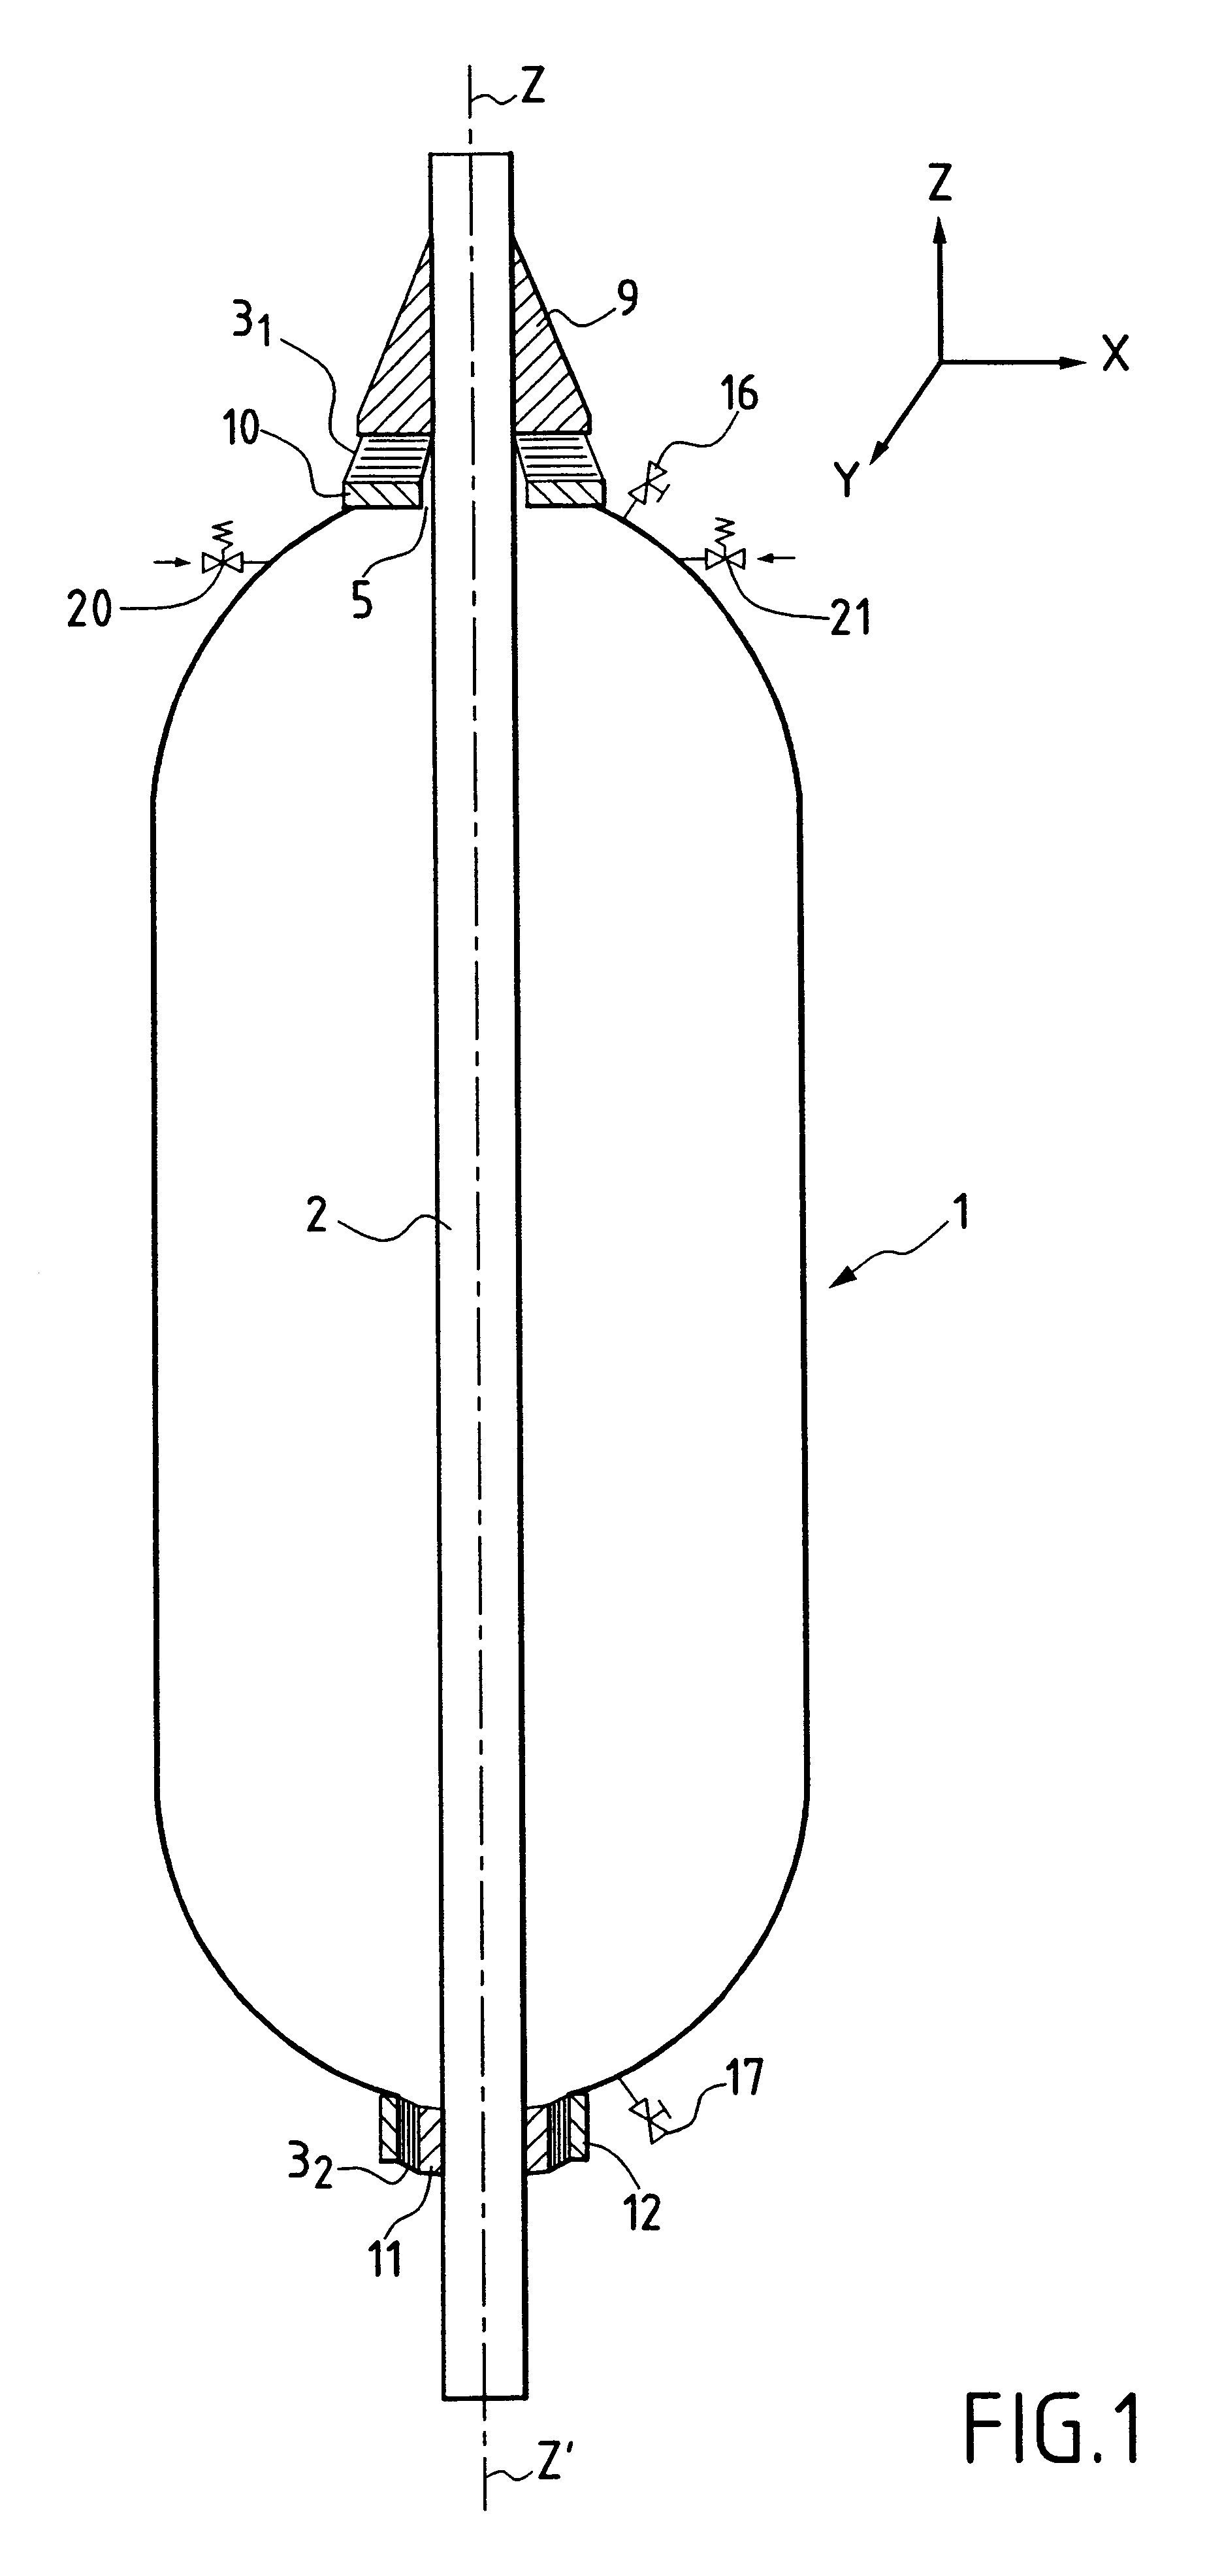 Bottom to surface link system comprising a submarine pipe assembled to at least one float